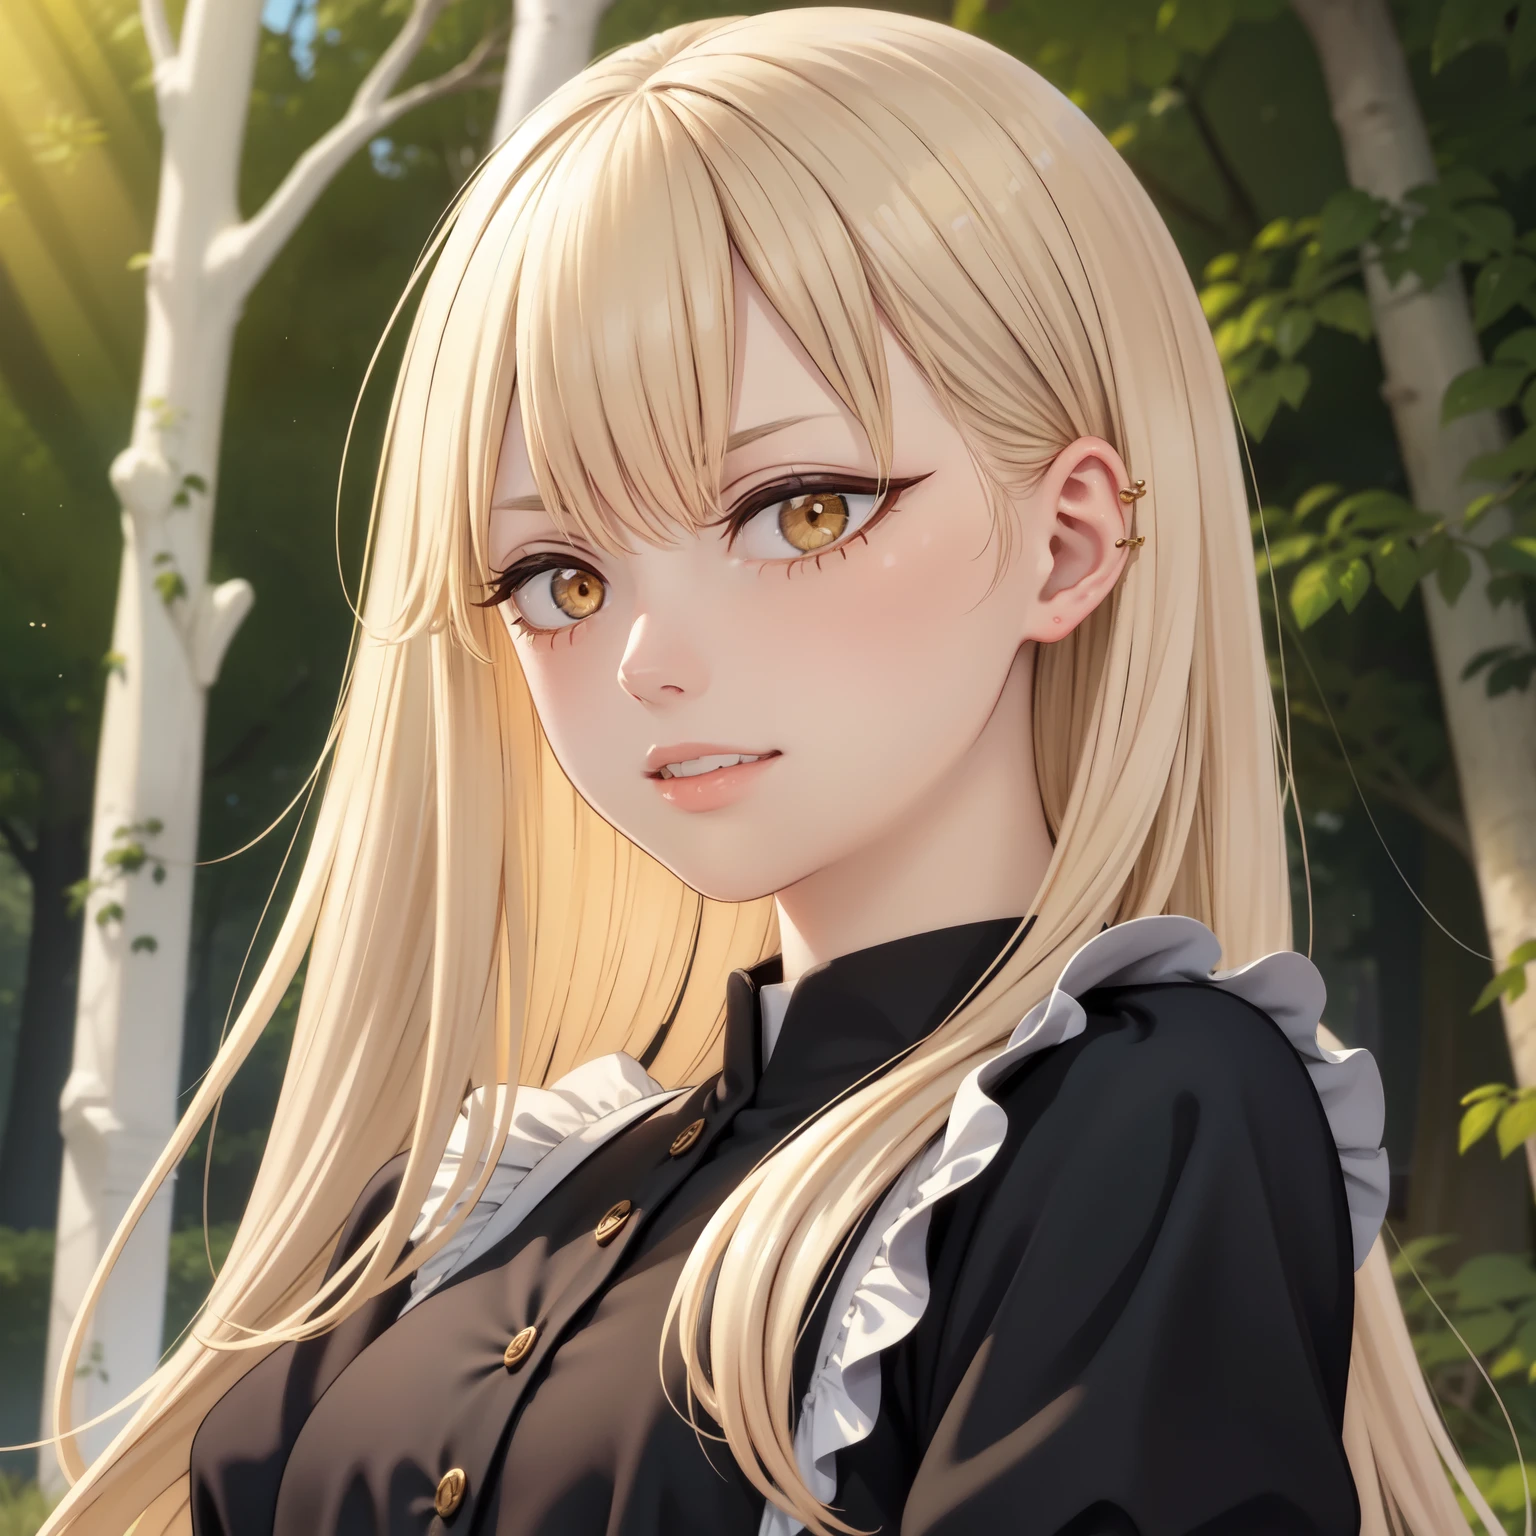 best quality,ultra-detailed,realistic:1.37,highres,golden hair,golden eyes,detailed facial features,serious expressions,beautiful detailed lips,long eyelashes,Guideau (majo to yajuu), maid outfit,golden light illuminating the scene,mysterious atmosphere,enchanted forest background,faint hint of magic in the air,subtle smile on her lips